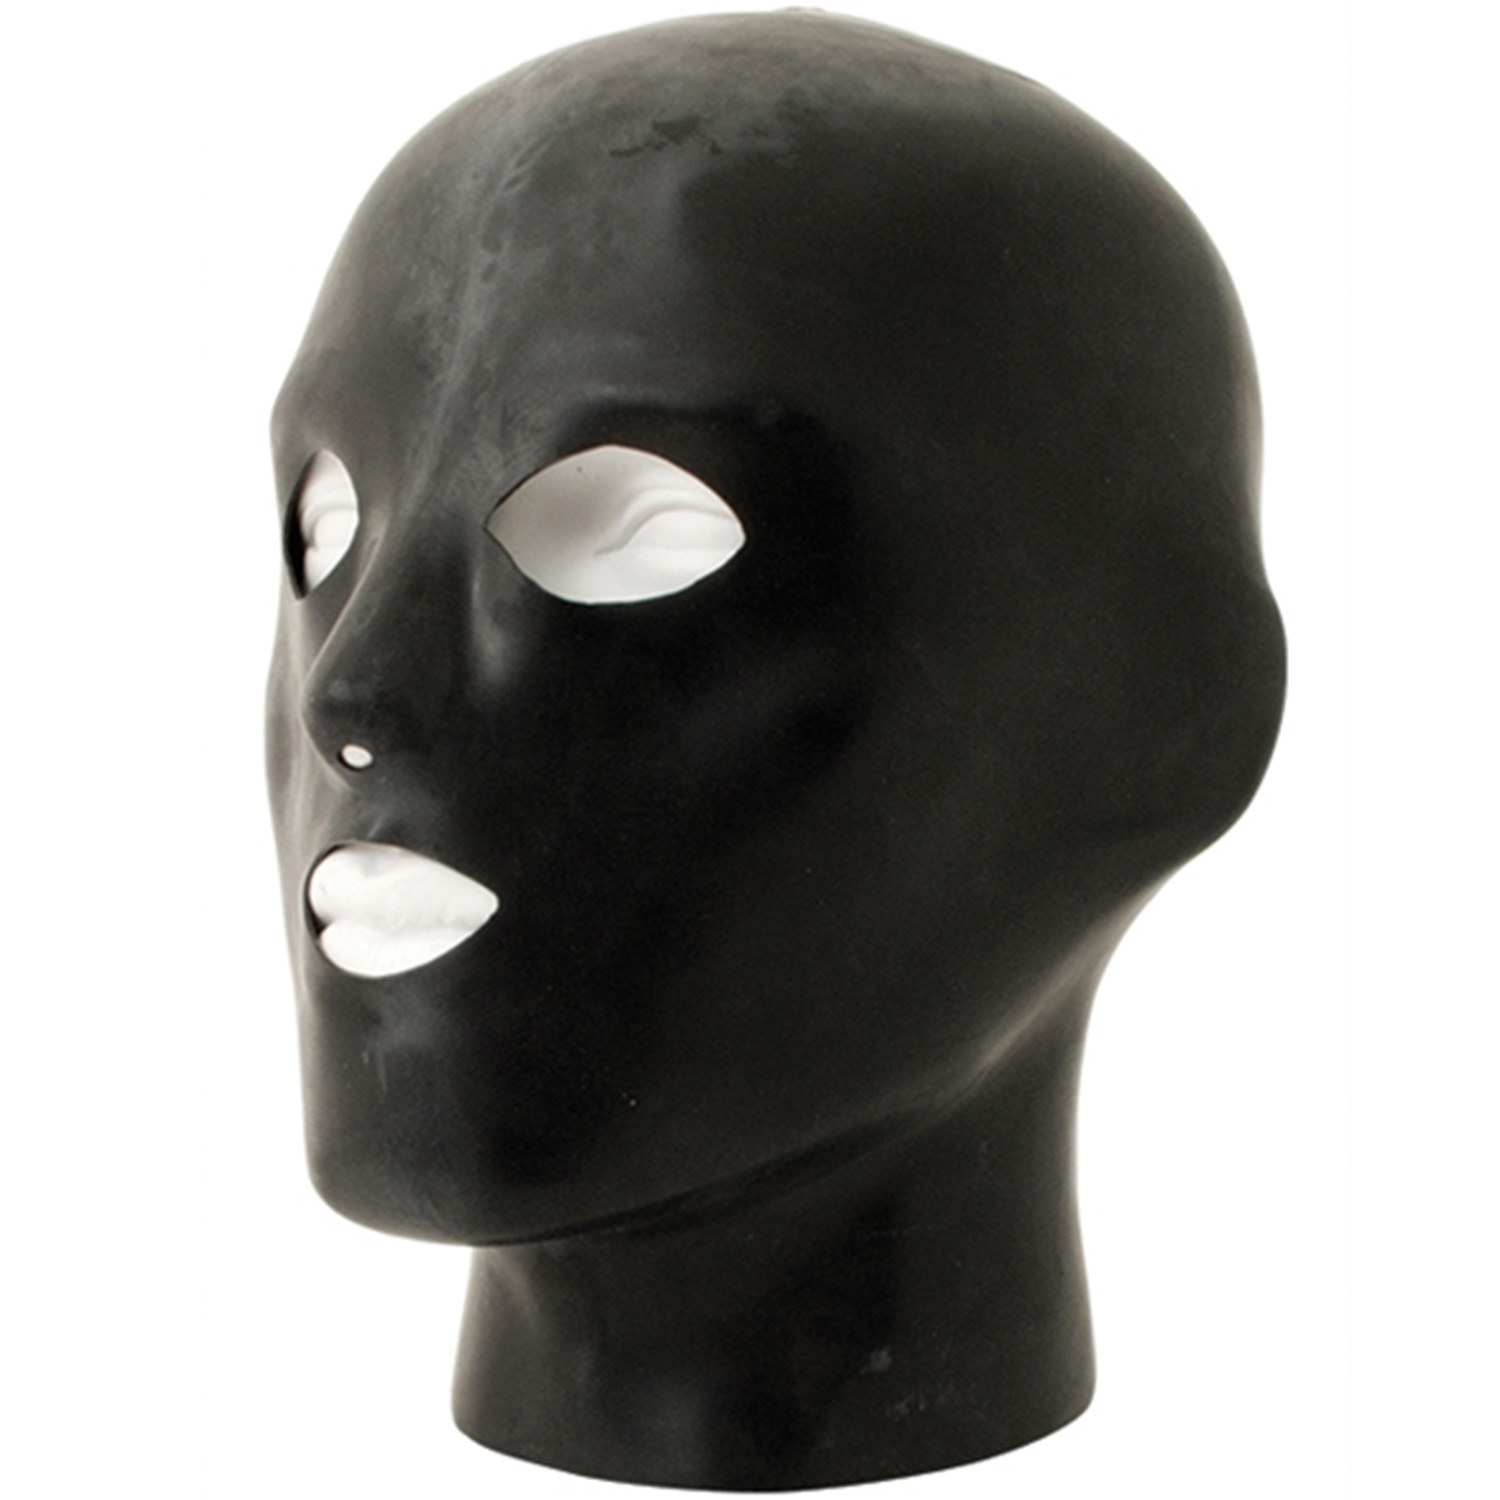 Mister B Rubber Heavy Duty Anatomical Hood With Holes - Black - S/M thumbnail